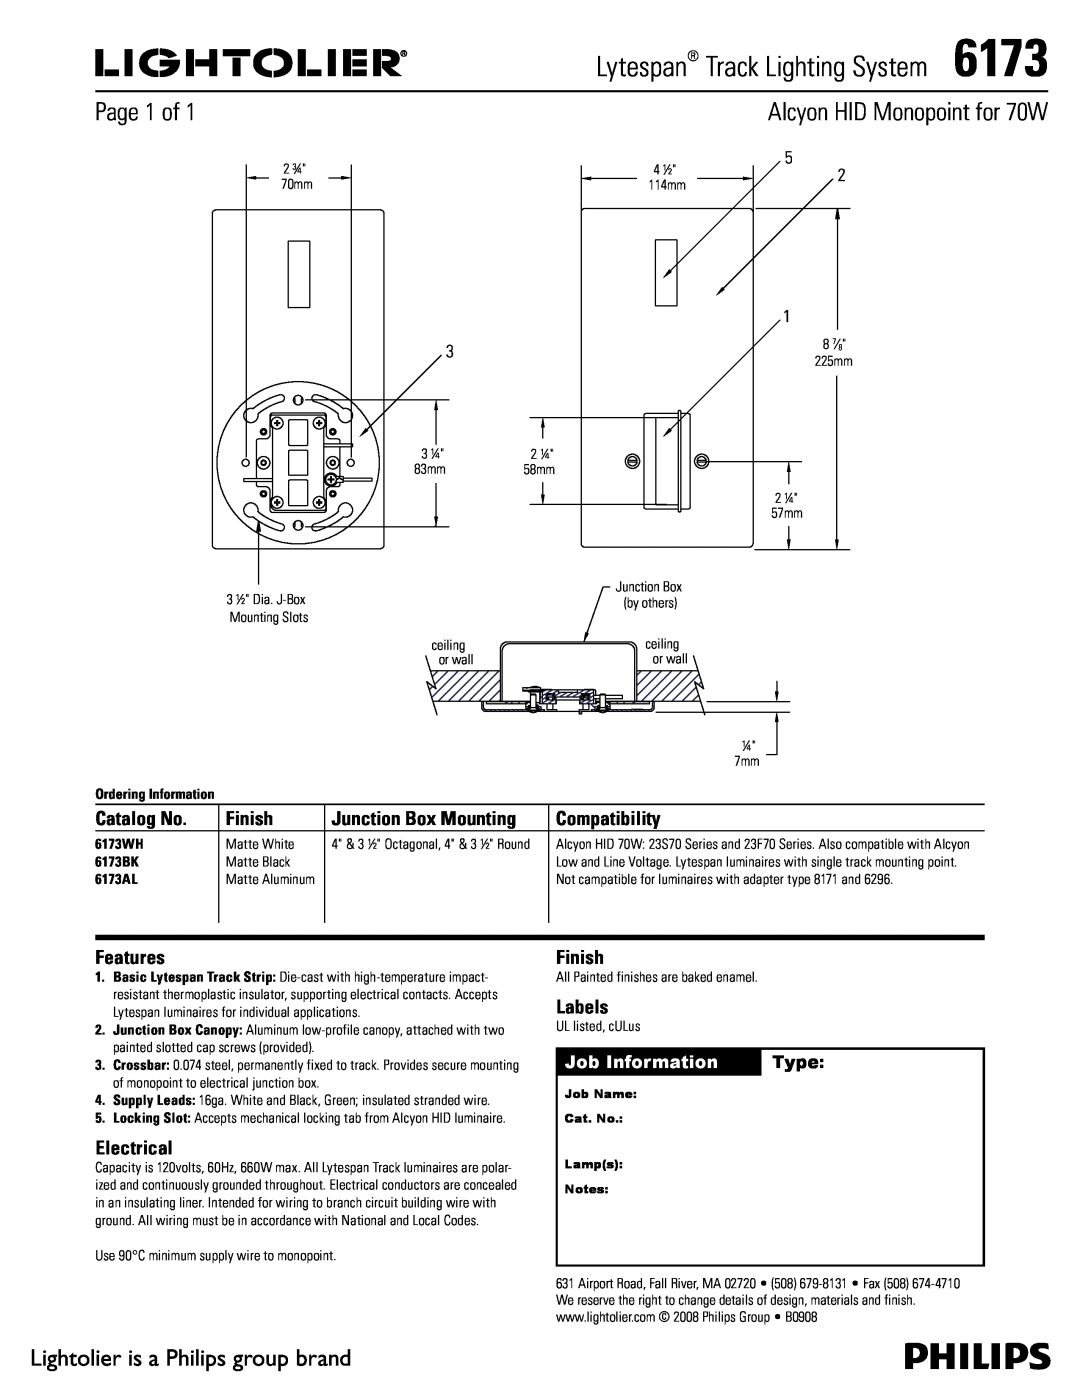 Lightolier manual Lytespan Track Lighting System6173, Alcyon HID Monopoint for 70W, Page 1 of, Catalog No, Finish, Type 